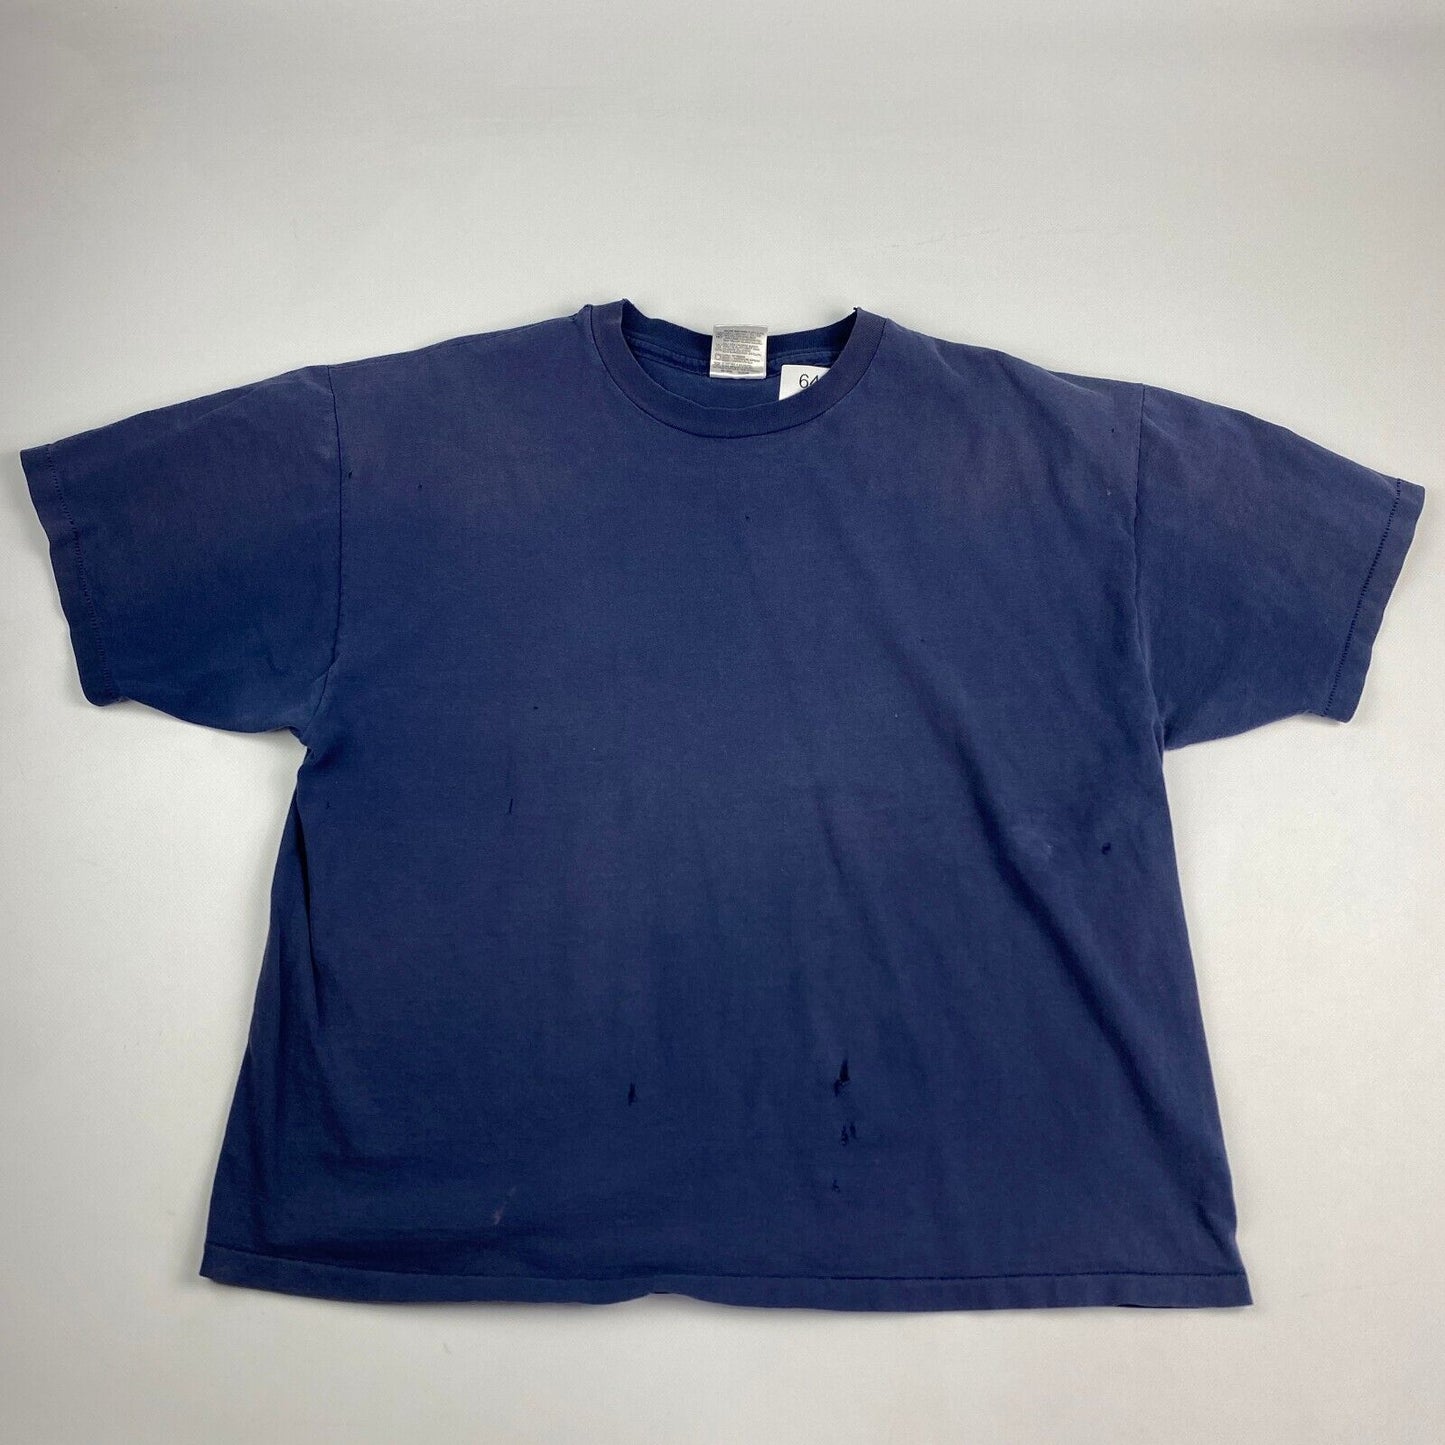 VINTAGE 90s Hanes Faded Distressed Navy Blank T-Shirt sz Large Men